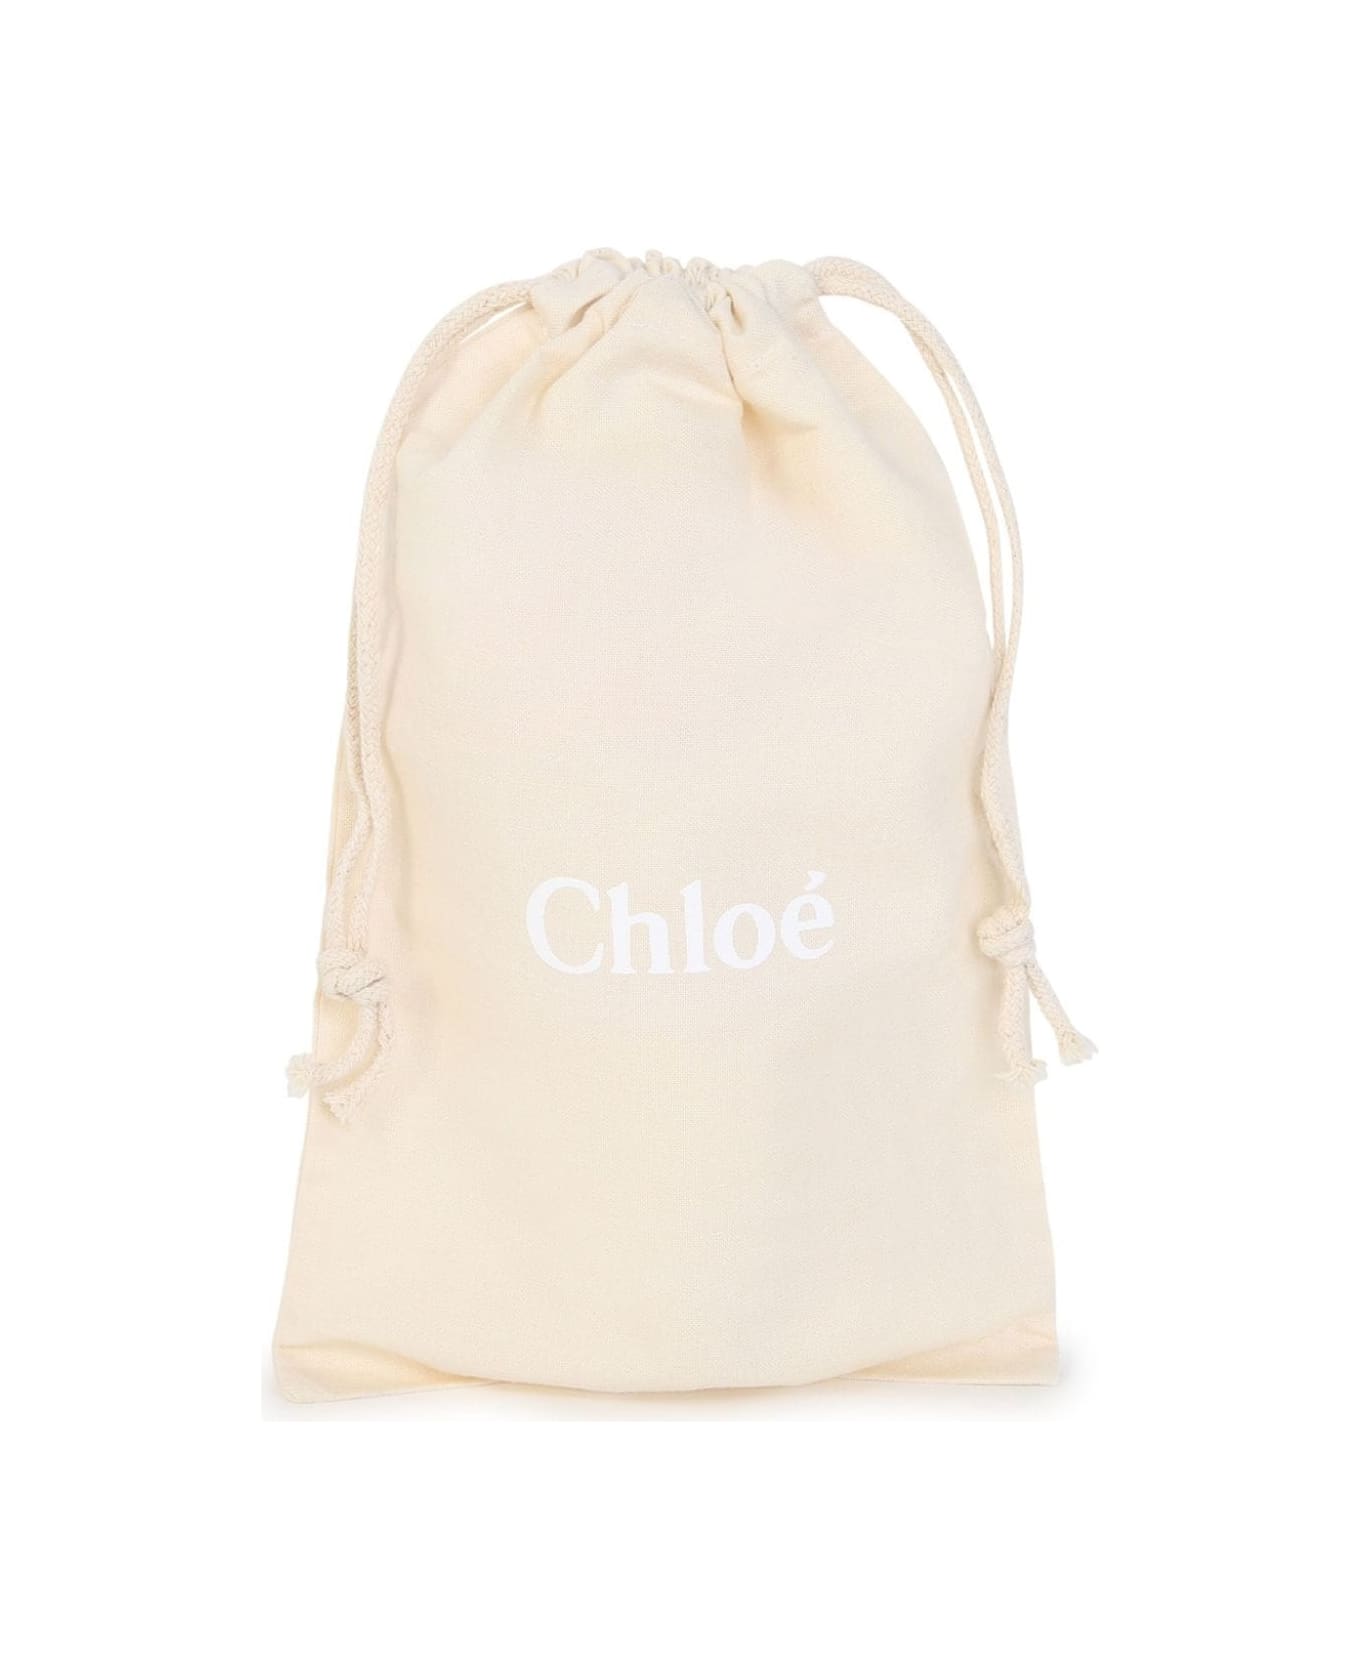 Chloé 210 Ml Baby Bottle In Light Pink With Logo - Pink アクセサリー＆ギフト